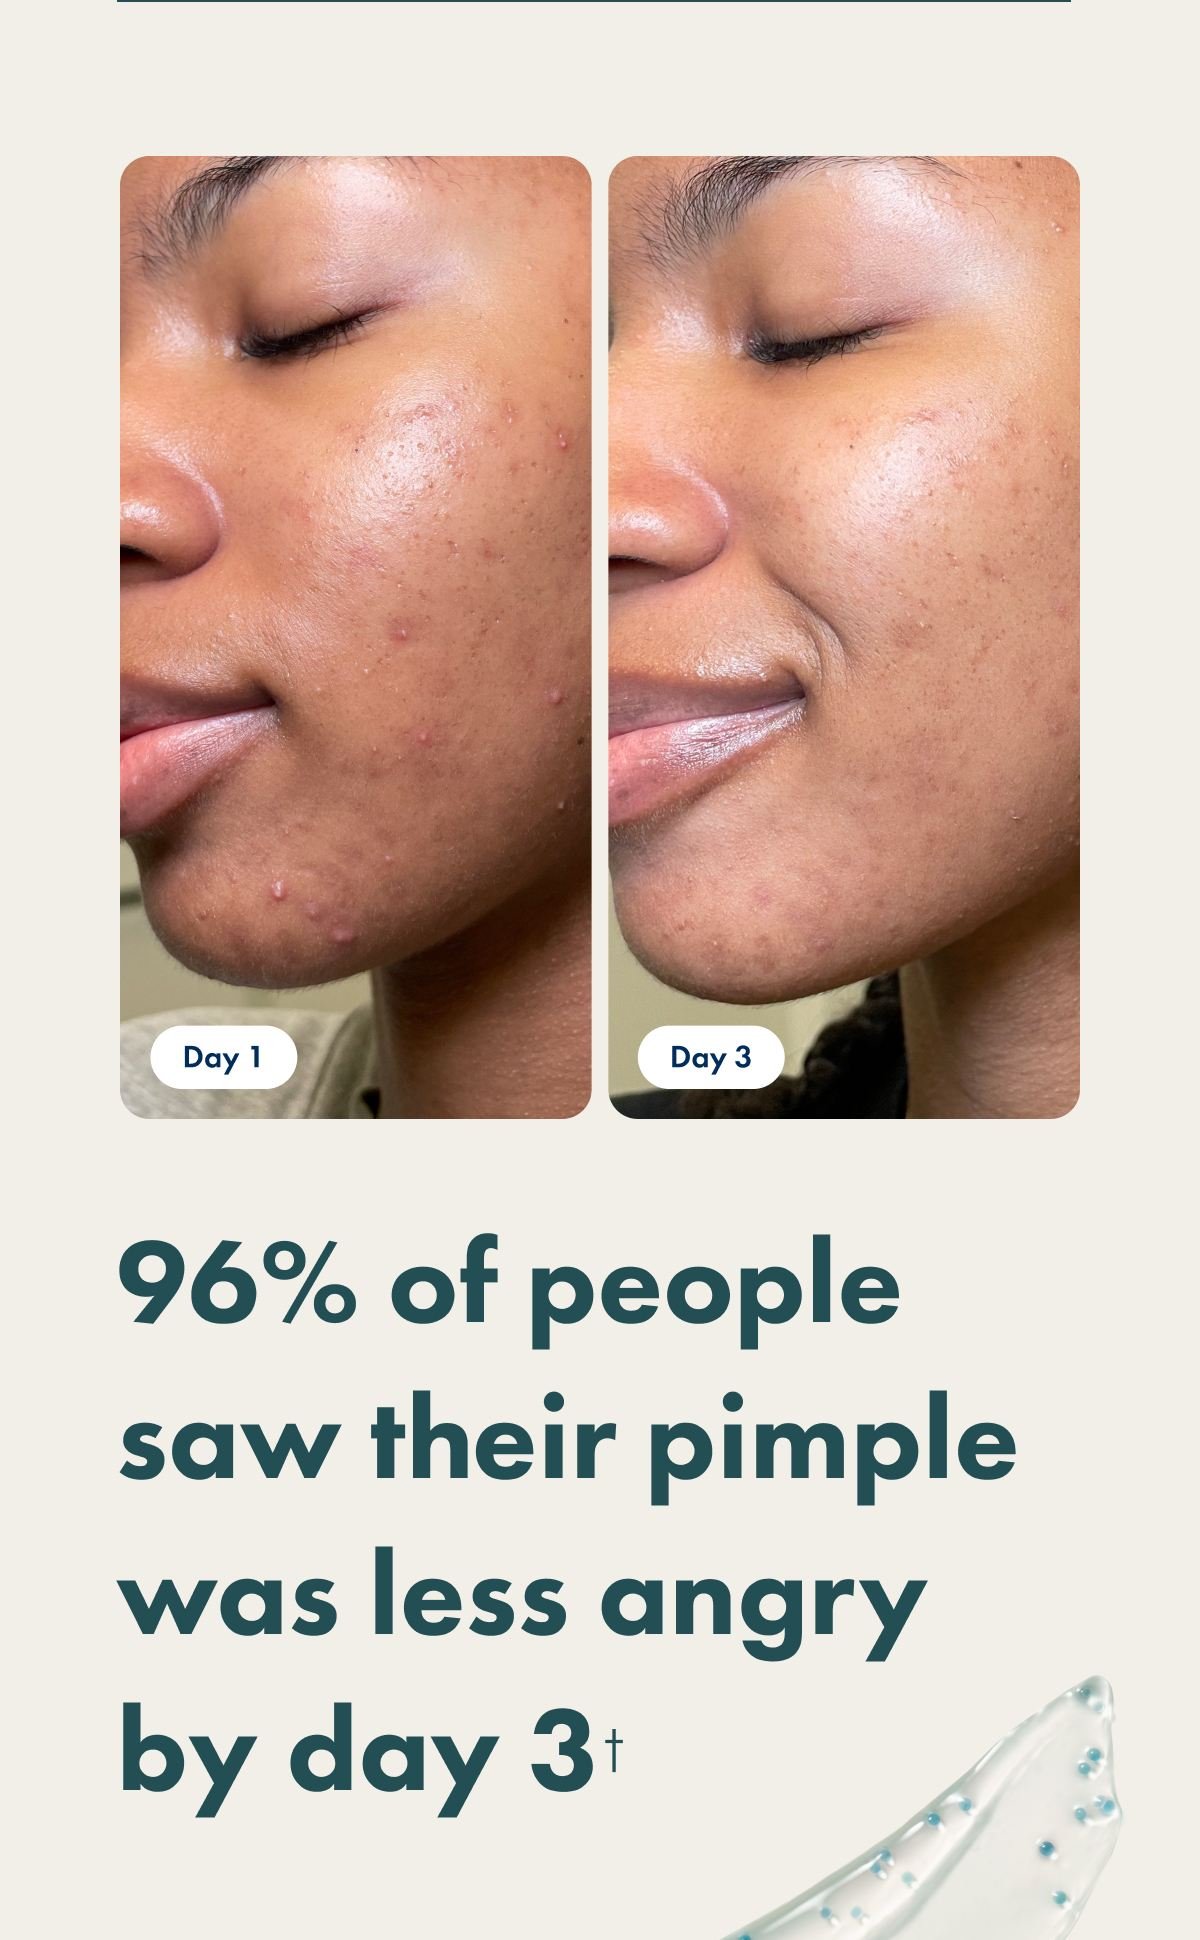 Before and after Pimple Correct image. 96% of people saw their pimple was less angry by day 3*